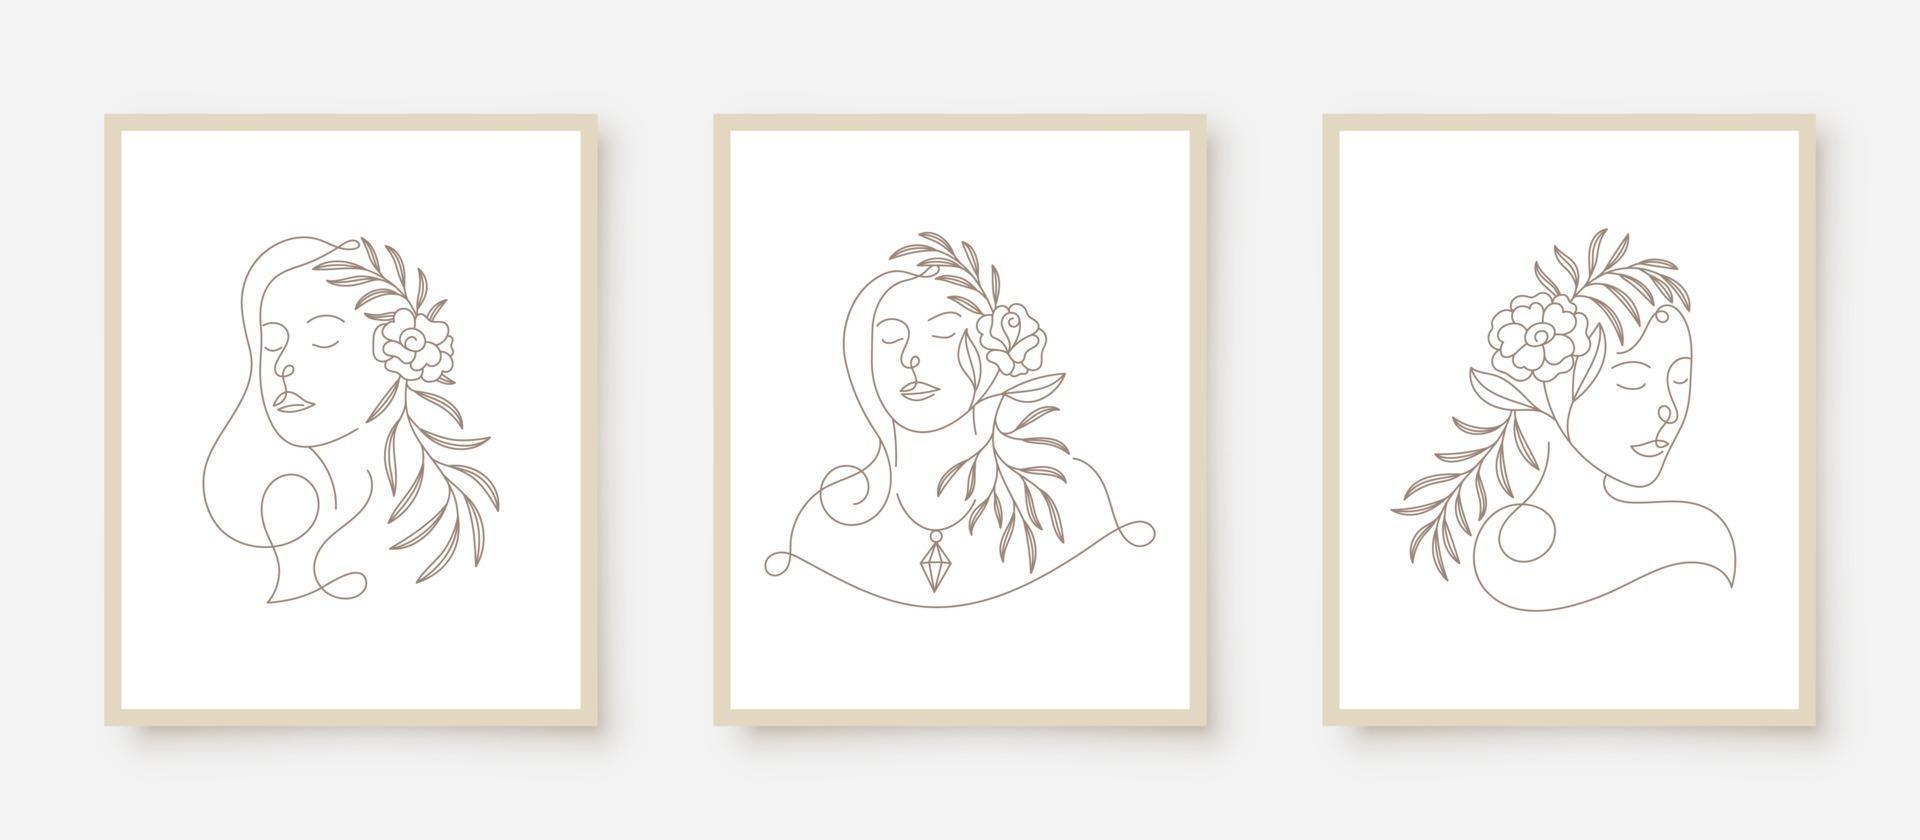 beauty woman faces in line art floral frame vector